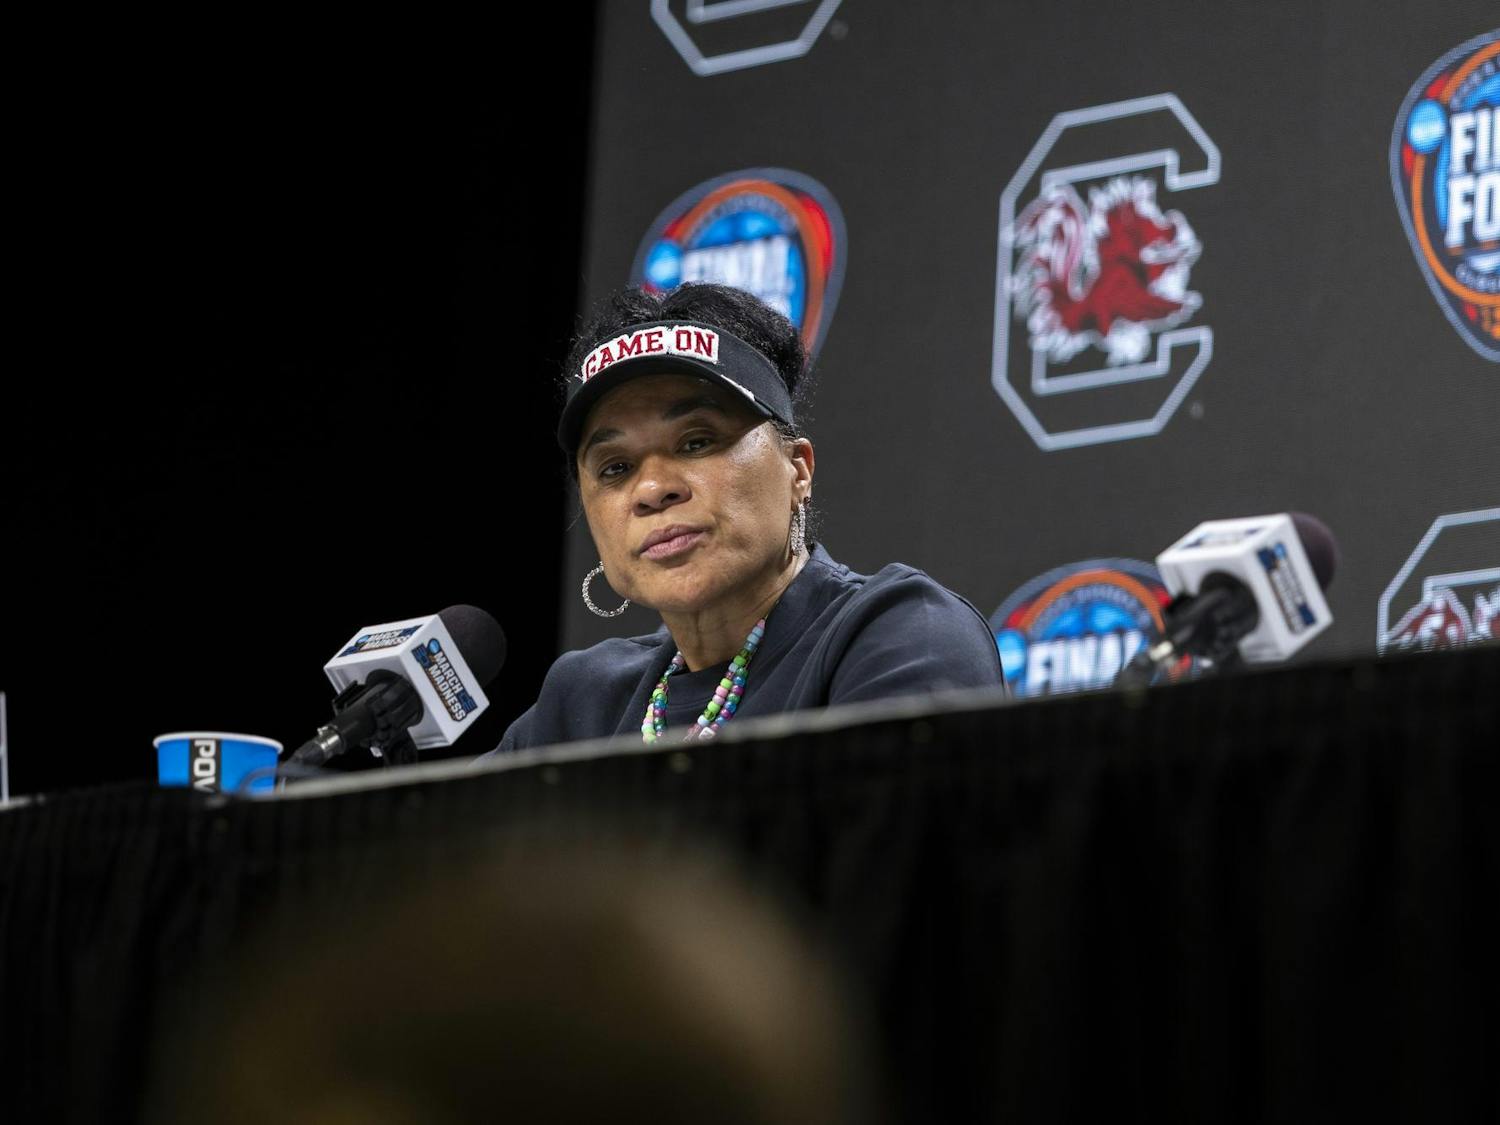 Gamecock women’s basketball head coach Dawn Staley answers questions during a press conference ahead of the NCAA women's basketball final in Cleveland, Ohio. Staley spoke about the team's preparation for the final game against the Iowa Hawkeyes, saying that the team is focused and prepared for the matchup.